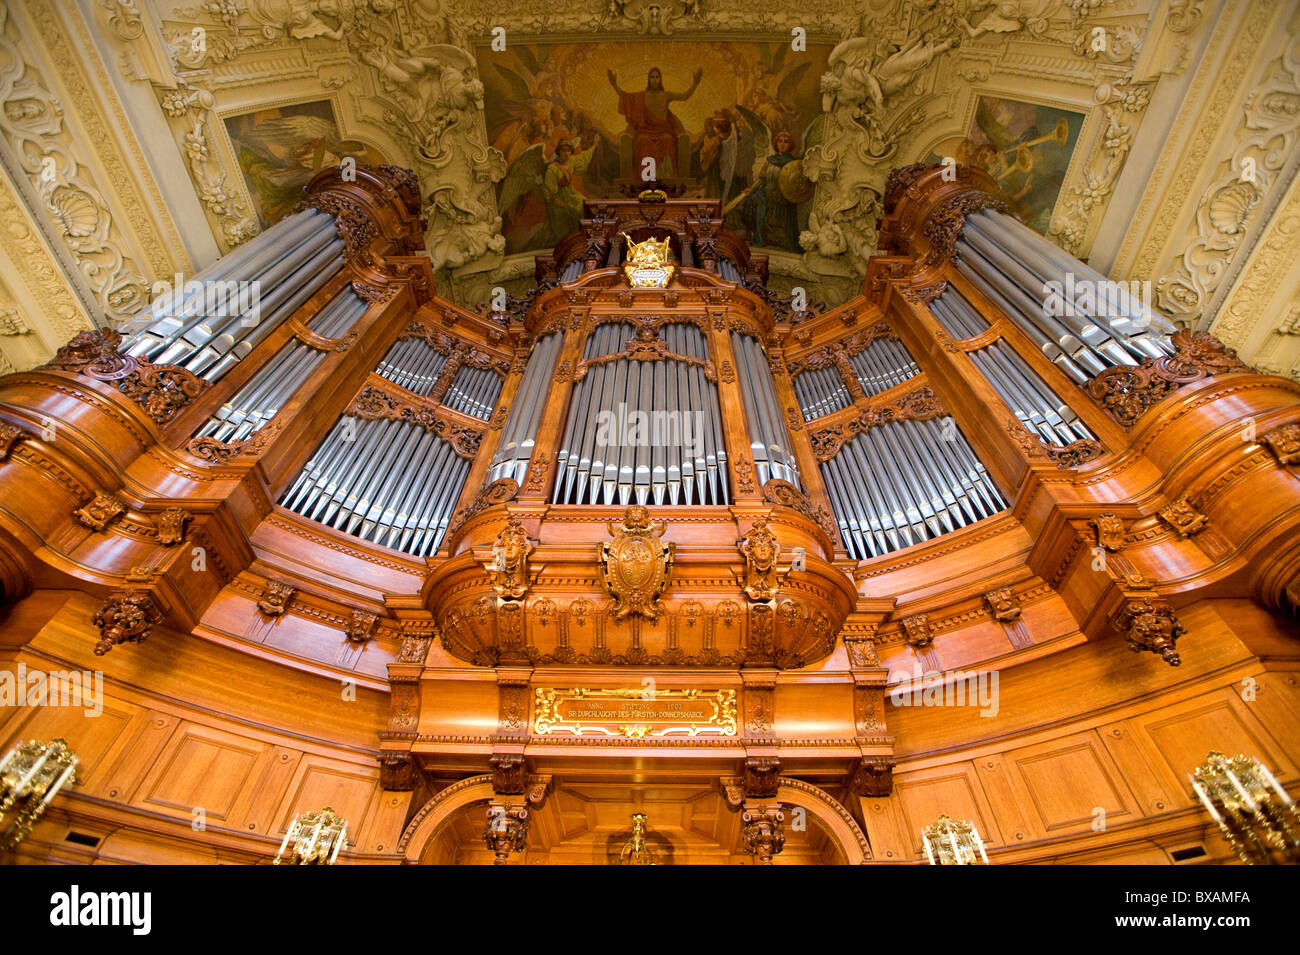 The Sauer organ in the Berlin Cathedral, Germany Stock Photo